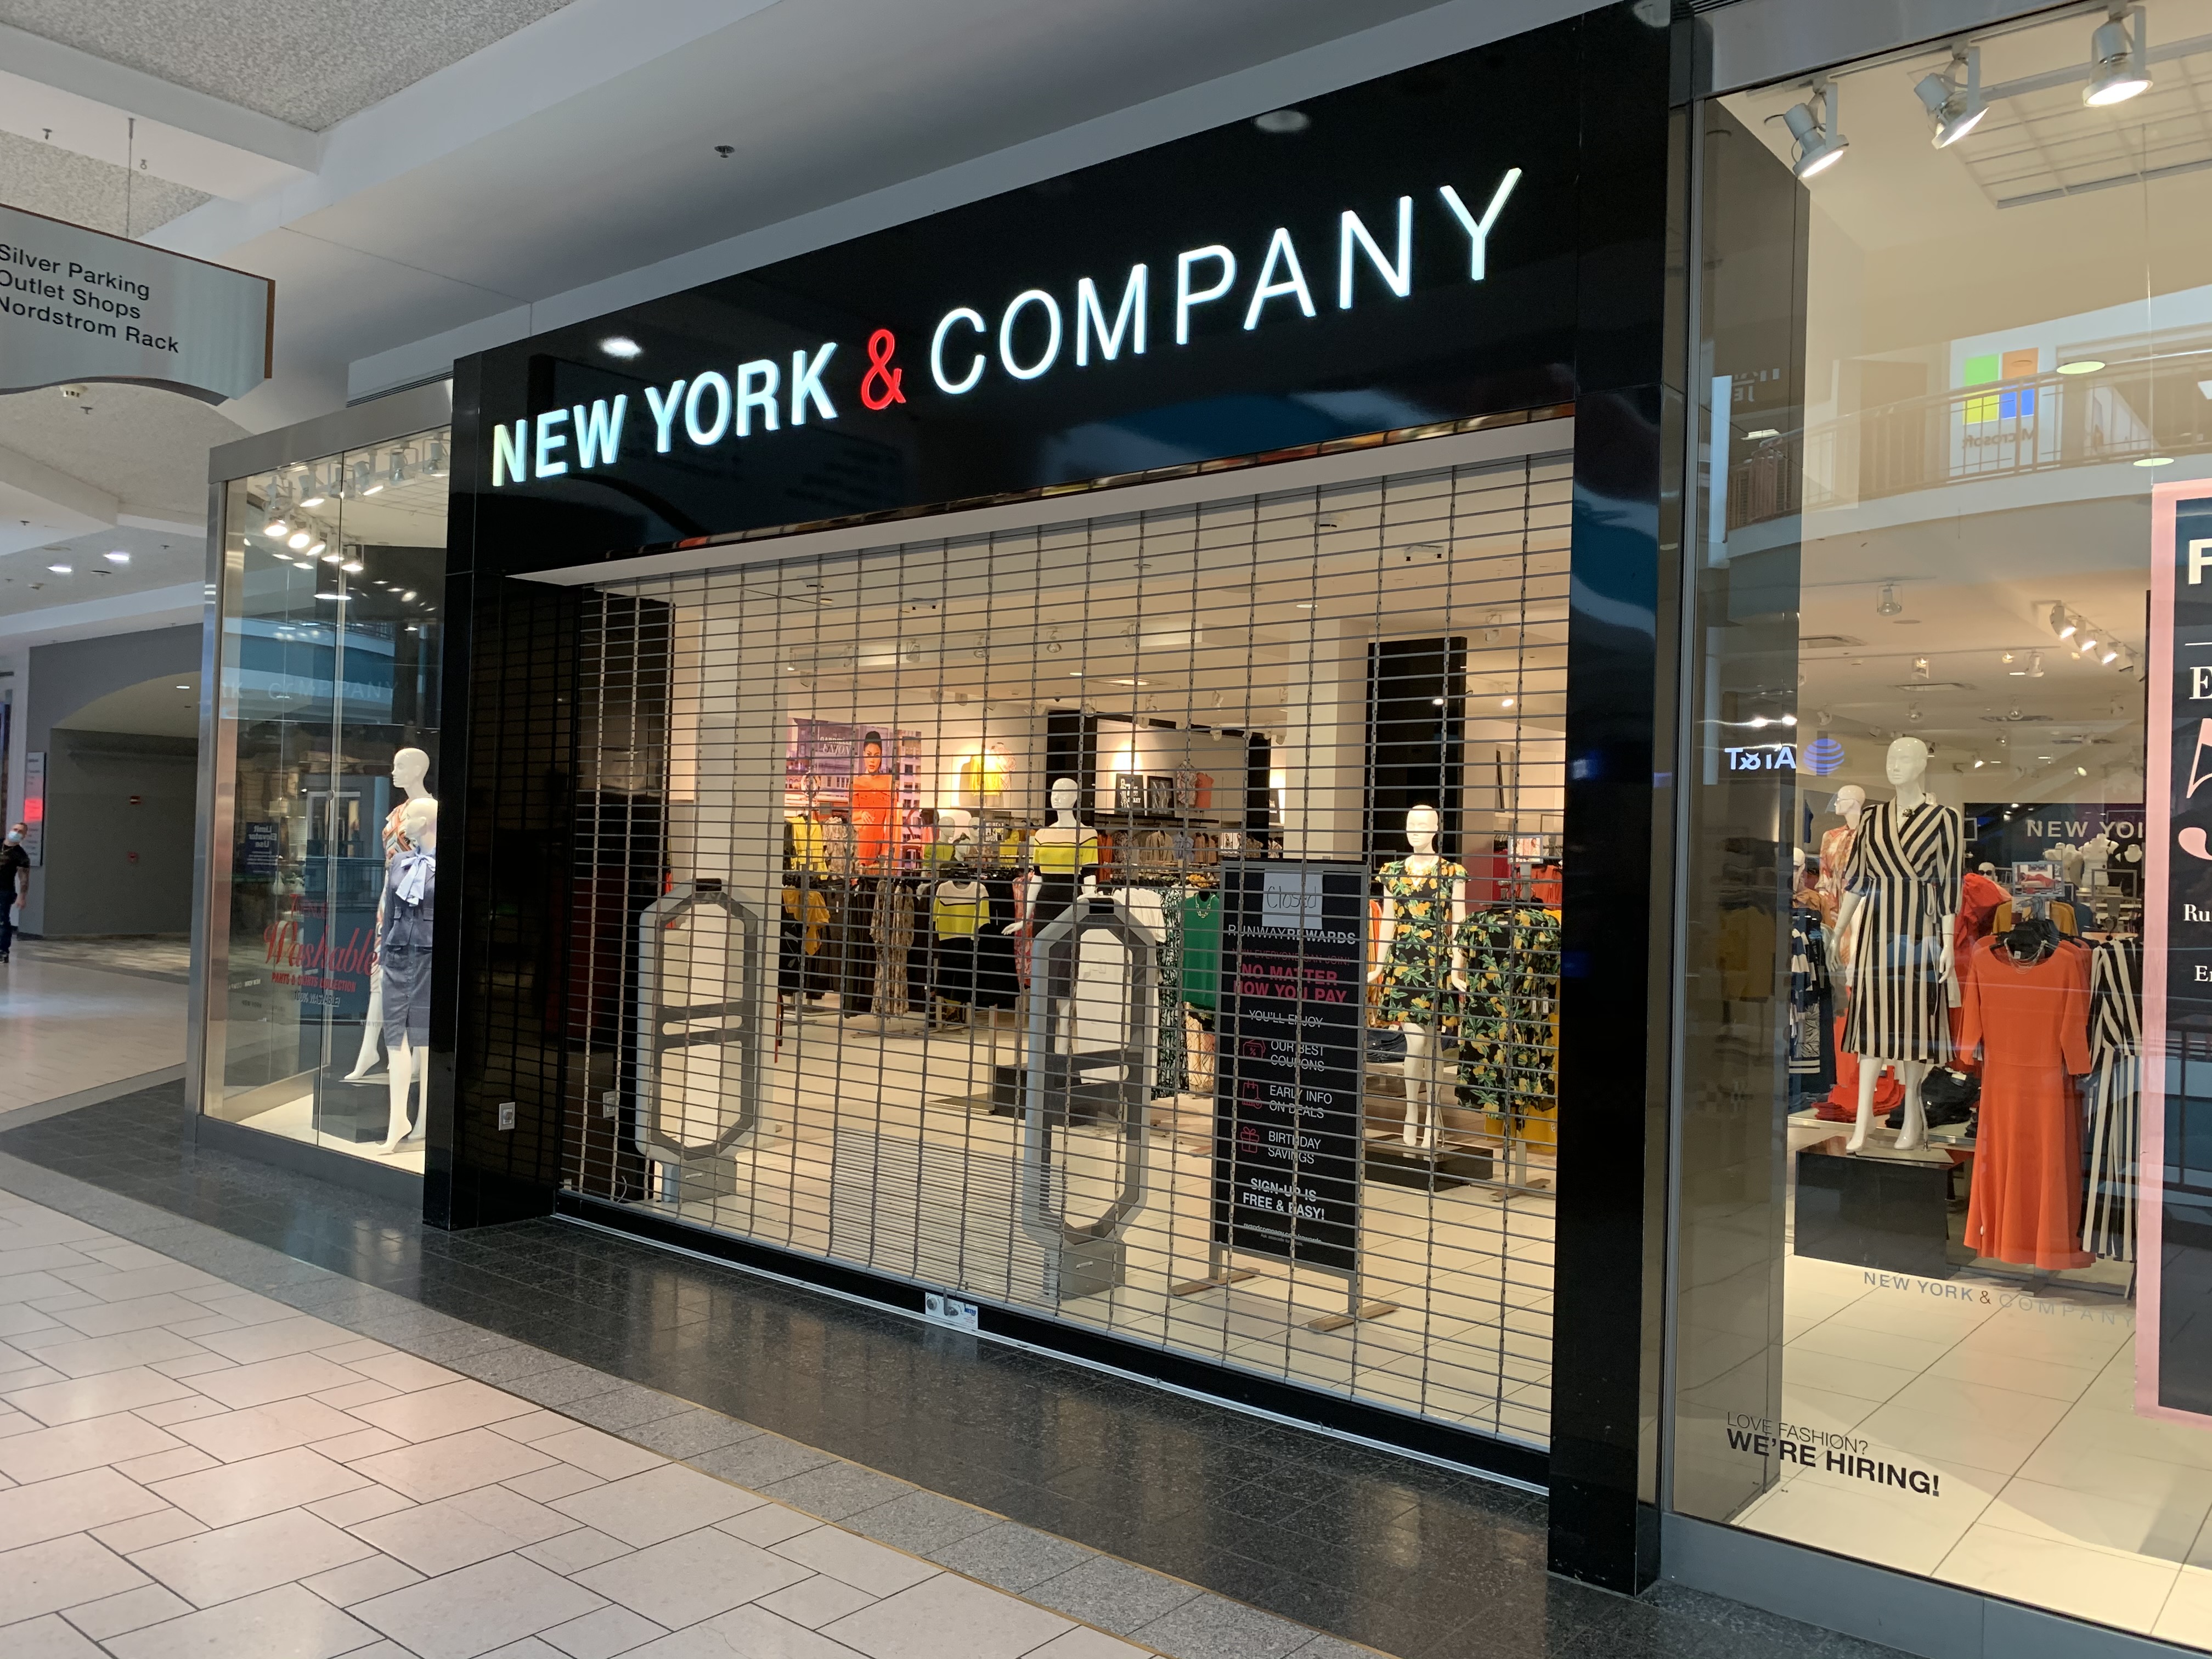 New York & Company files for bankruptcy, closing stores, 40